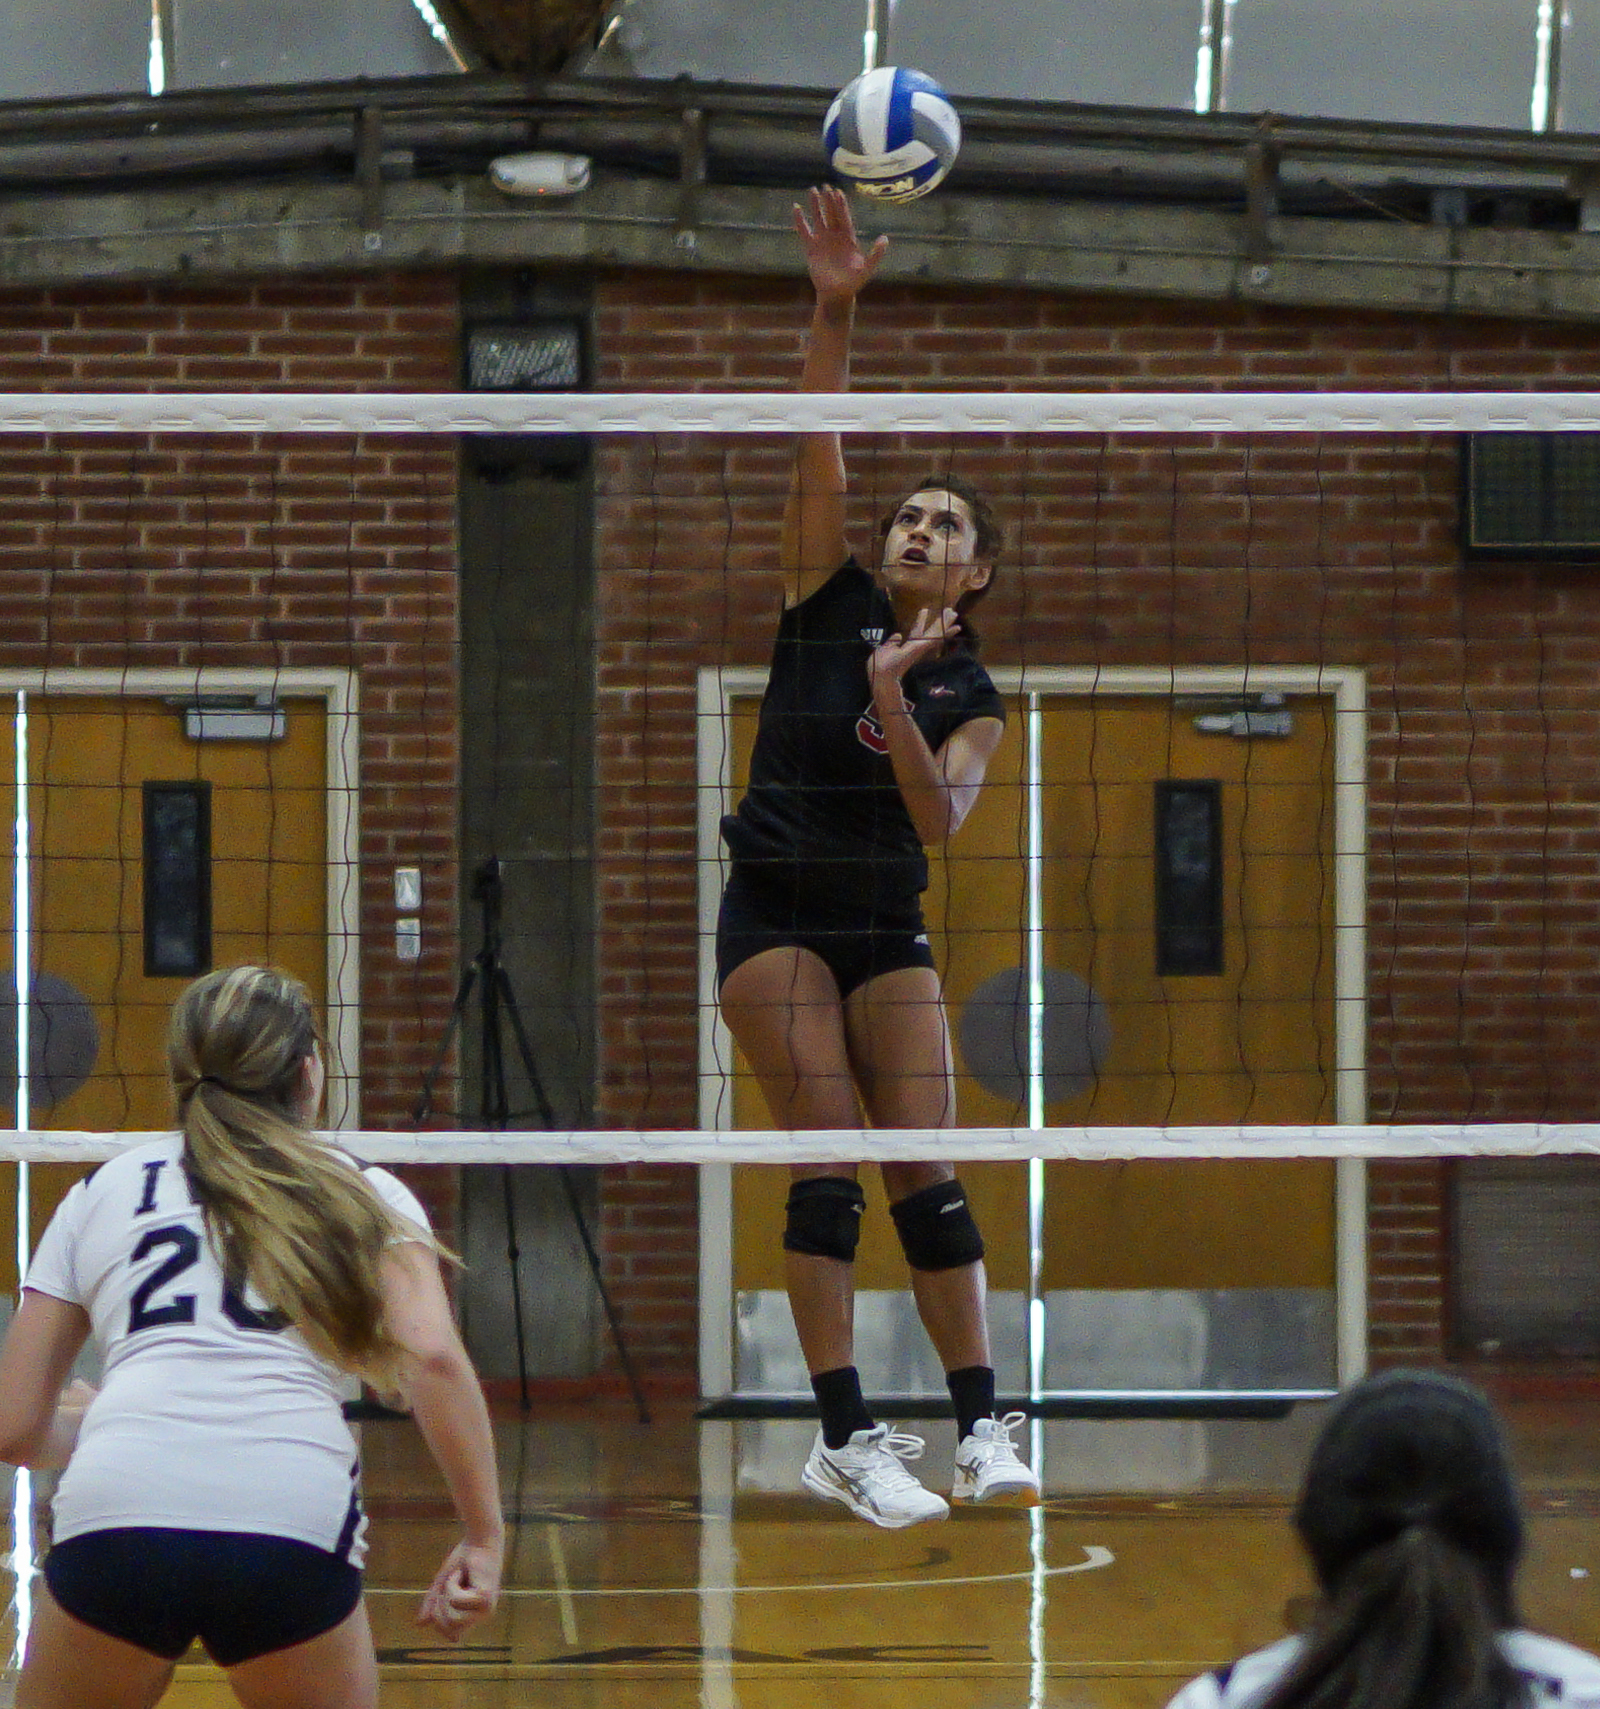 A female Palomar volleyball player jumps up and spikes the ball over a net with her right hand. Two opponents stand in the foreground.